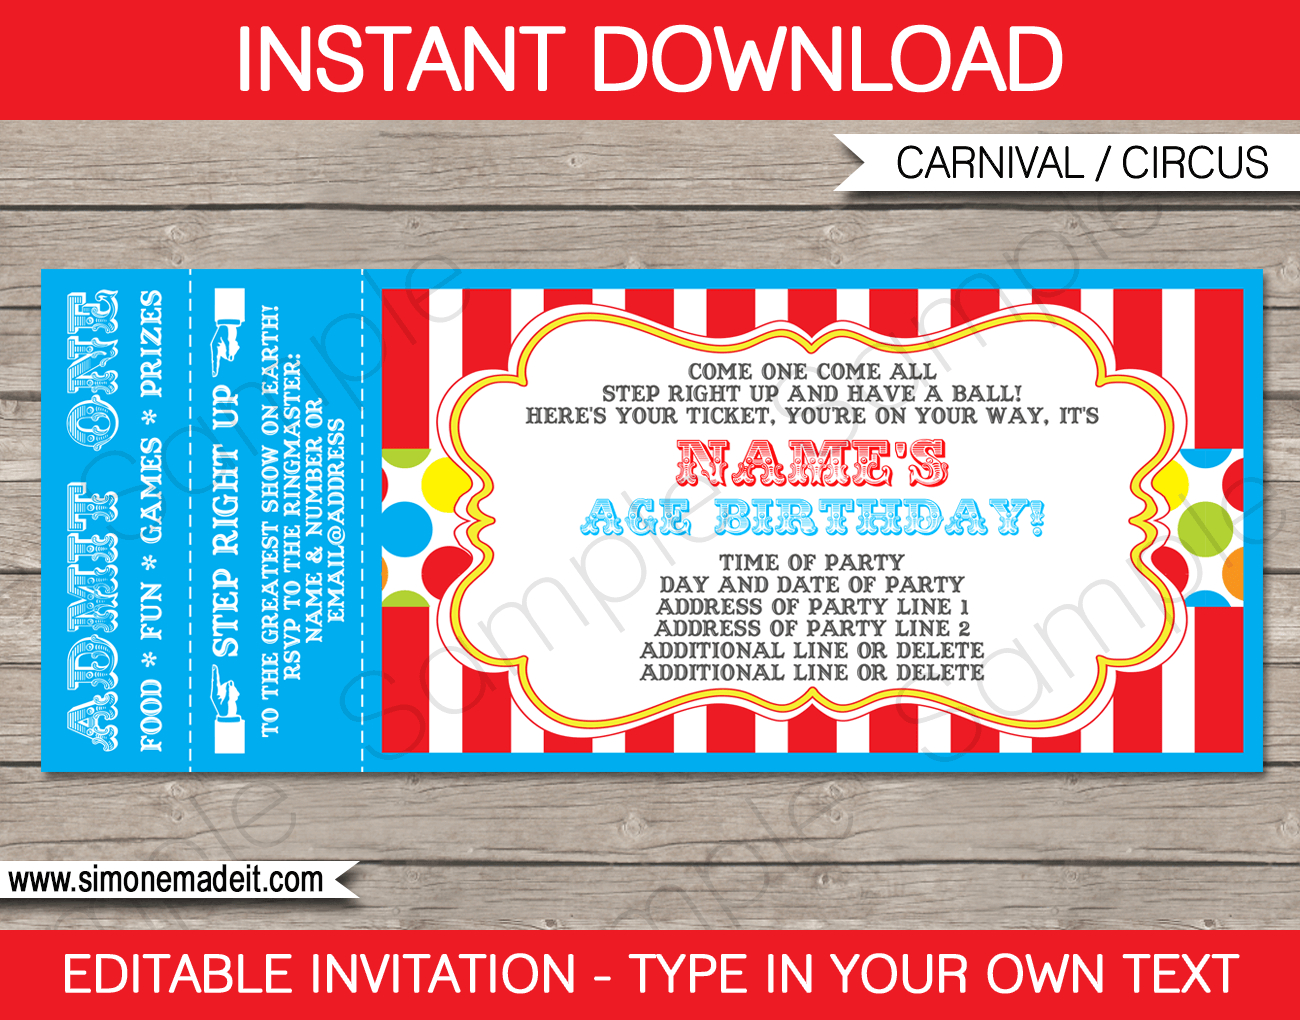 Carnival Party Ticket Invitation Template Carnival Or Circus regarding proportions 1300 X 1020